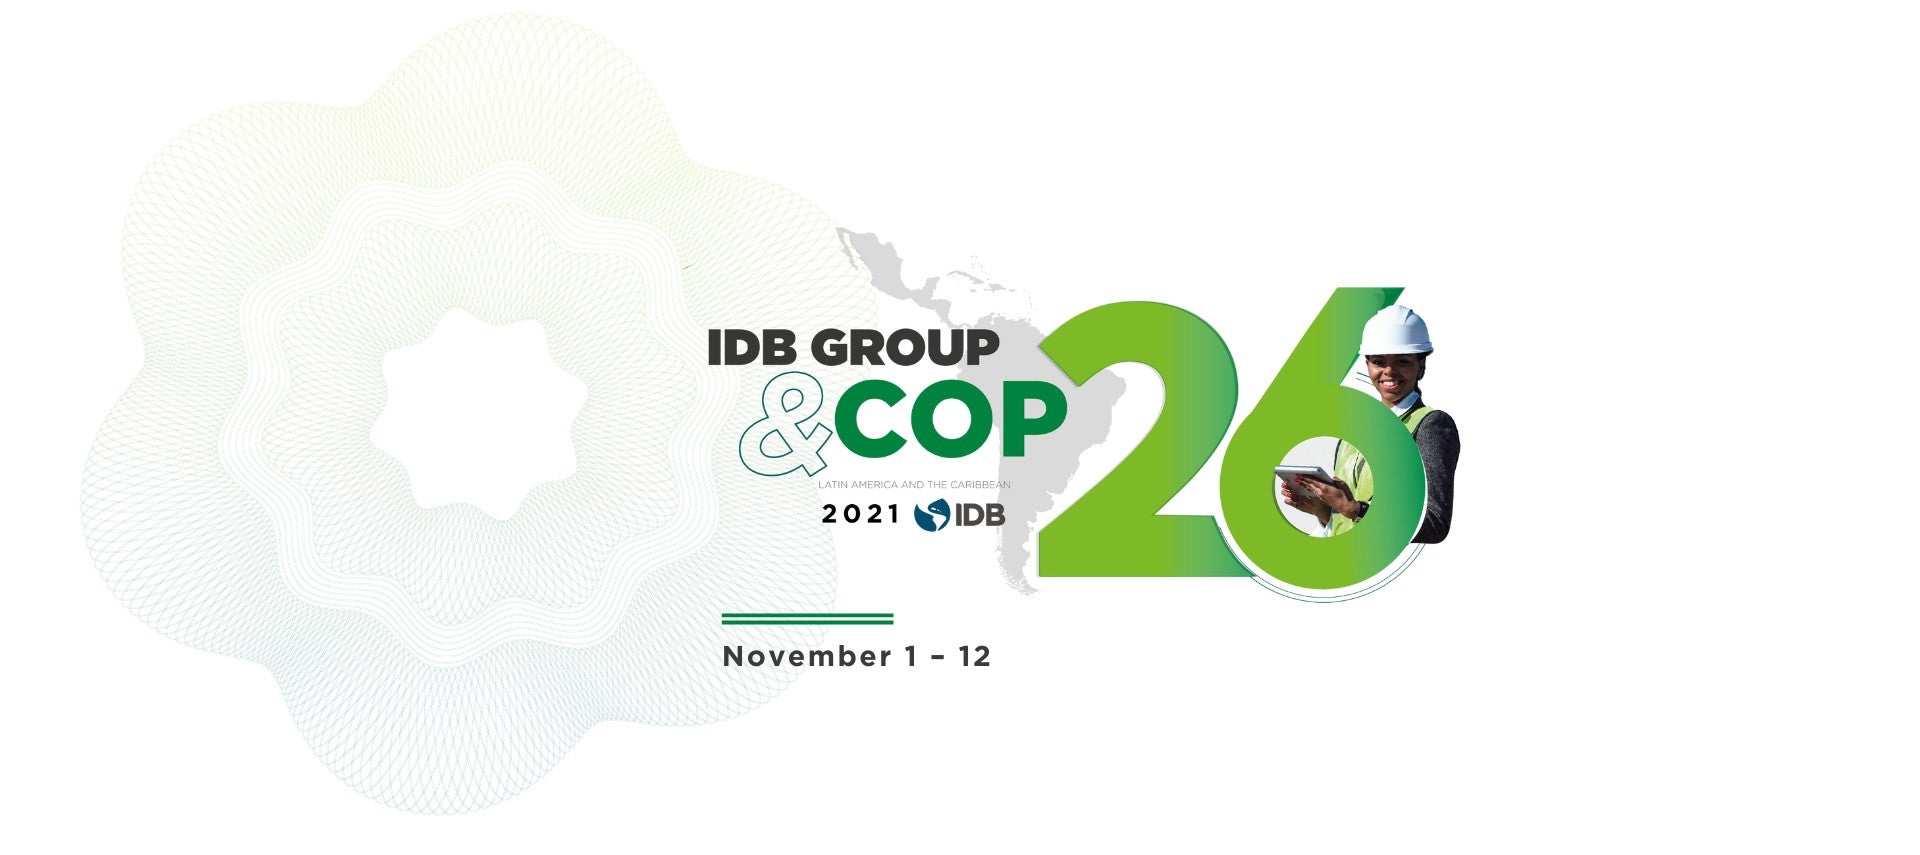 Learn more about IDB Group's leadership at COP26